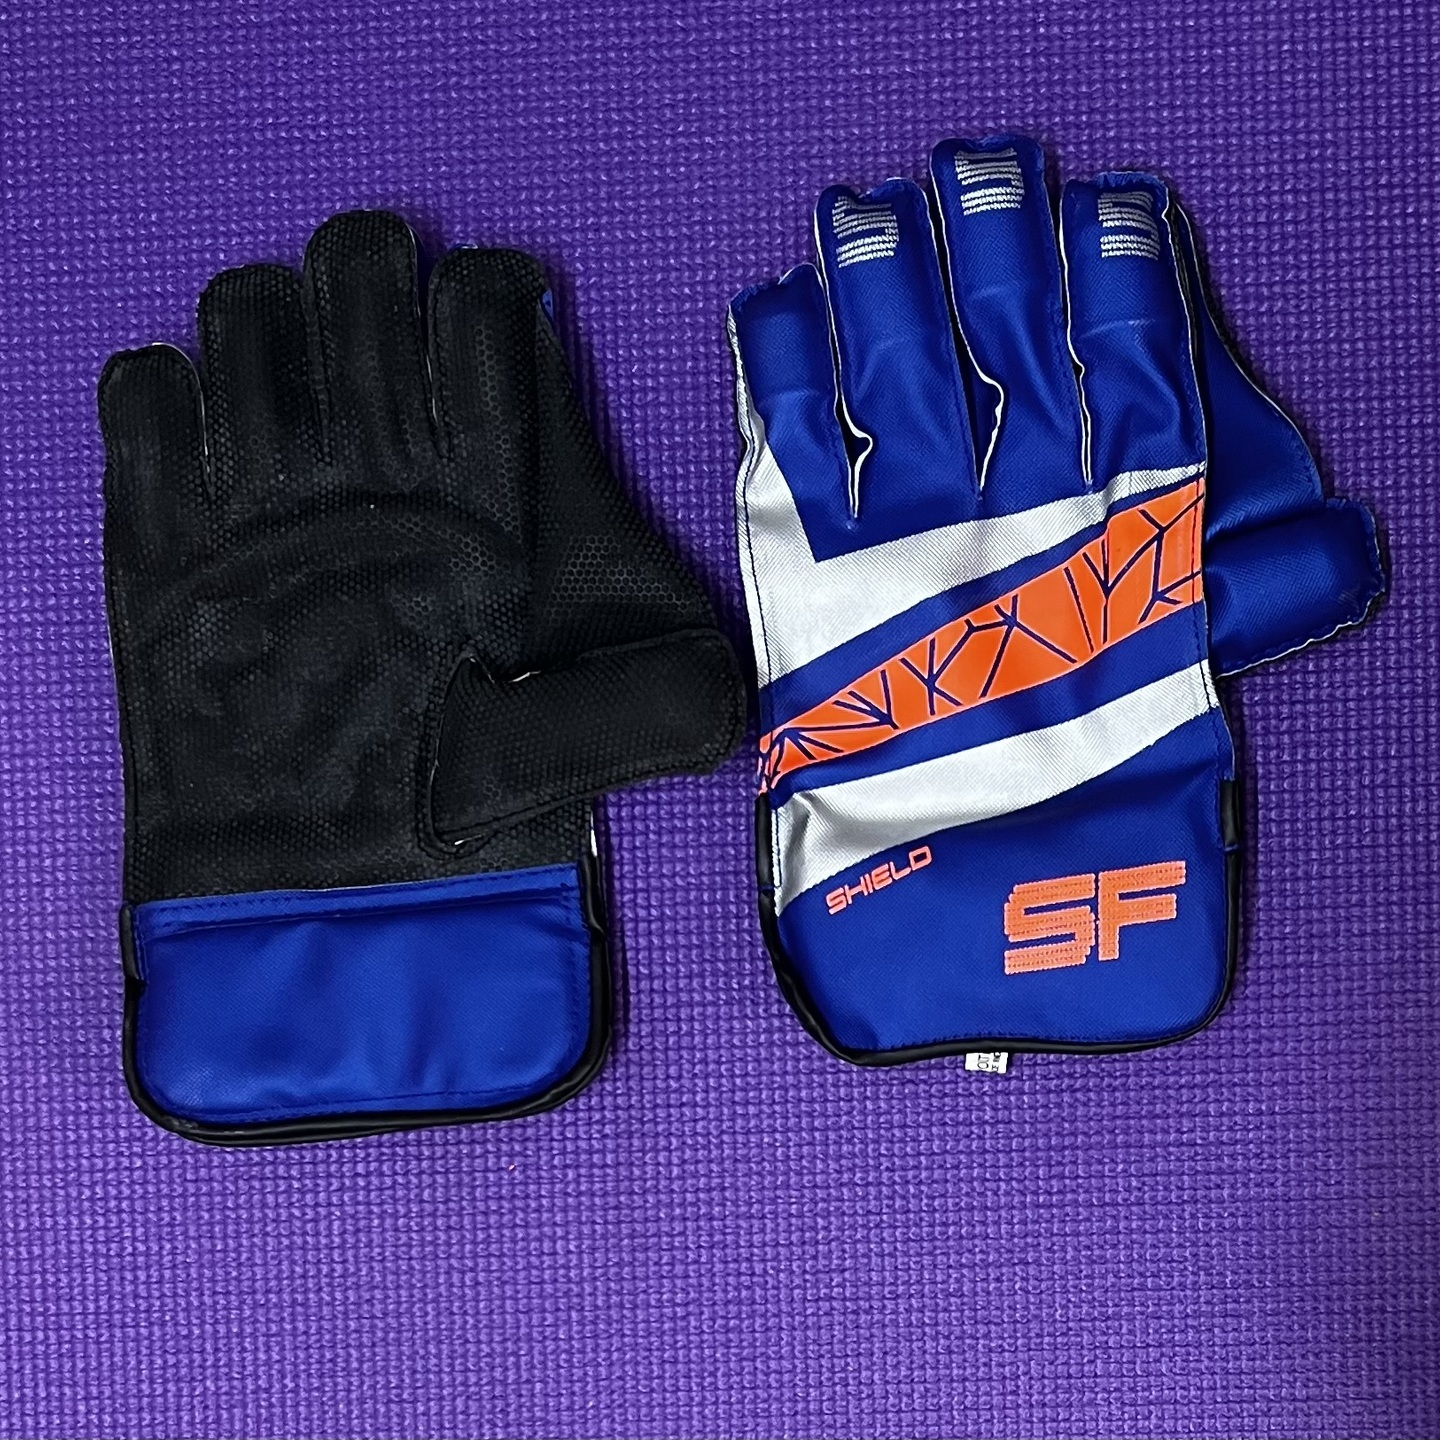 SF SHIELD CRICKET WICKET KEEPING GLOVES YOUTH